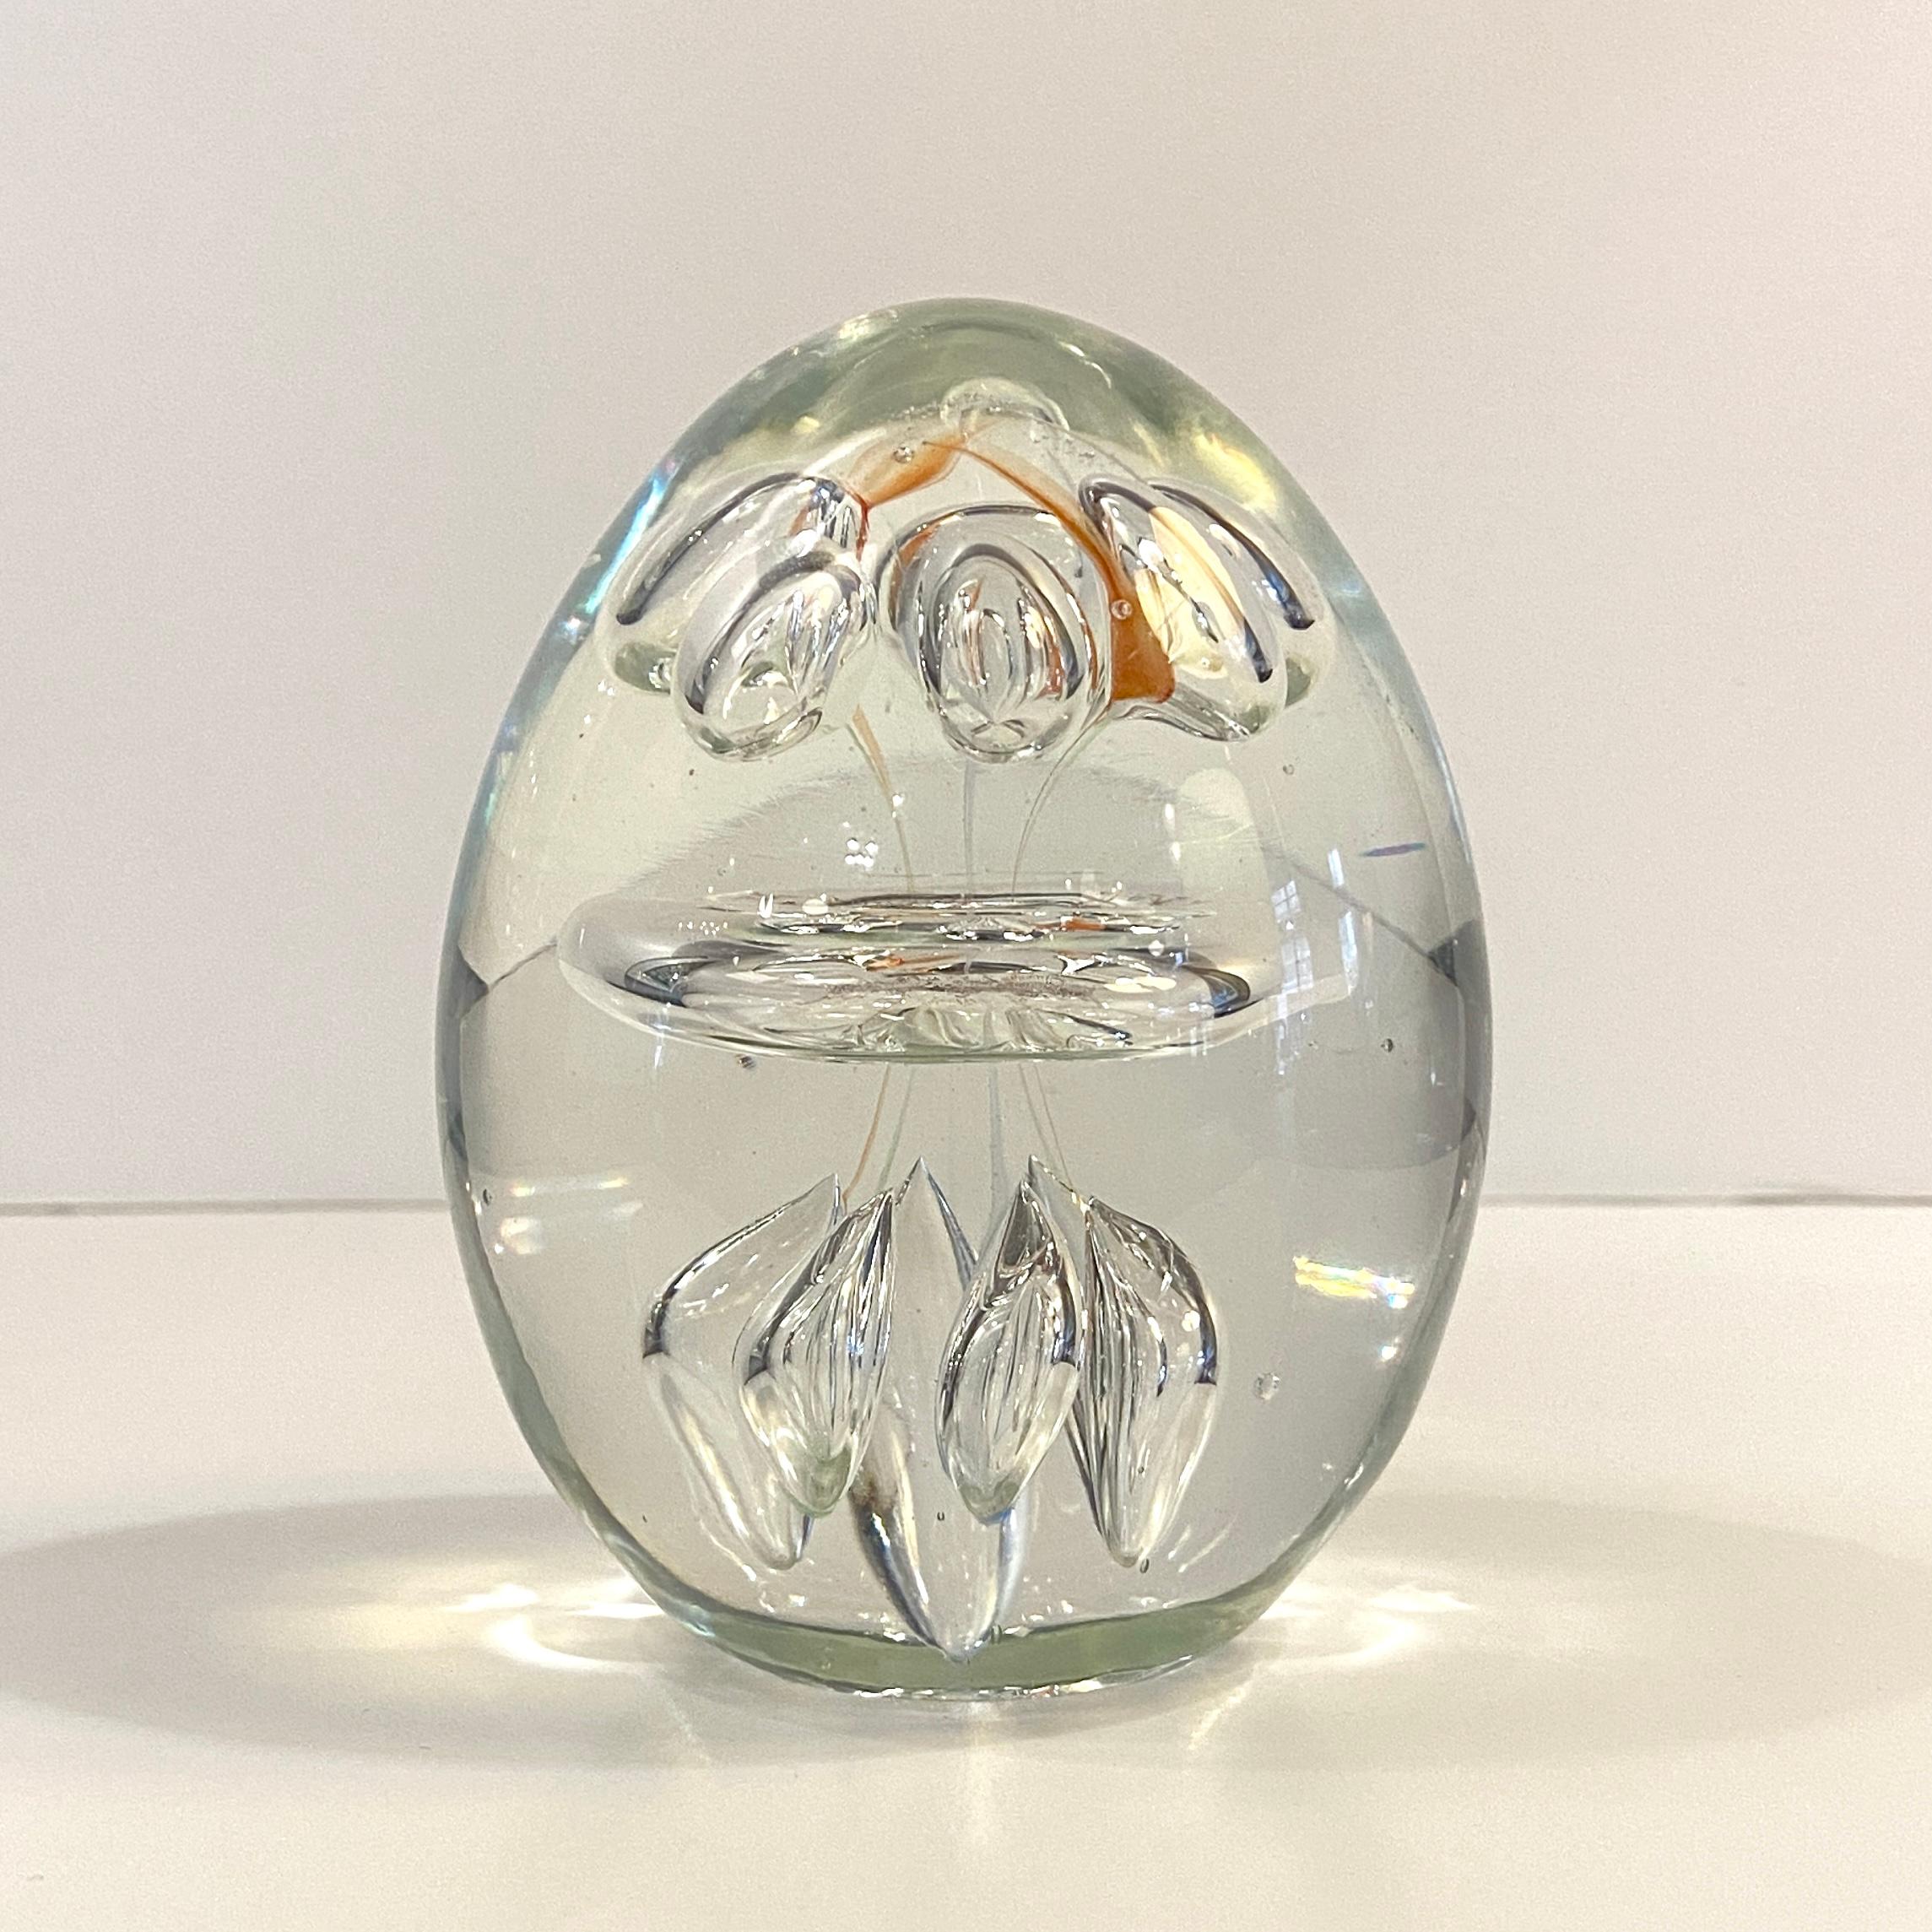 Hand-blown, clear, oblong, art glass paperweight features a clear hand-blown center ring with several controlled bubbles atop and below with the faintest hints of orange dash around the top. Attributed as Italian art glass from Murano, Italy. It's a